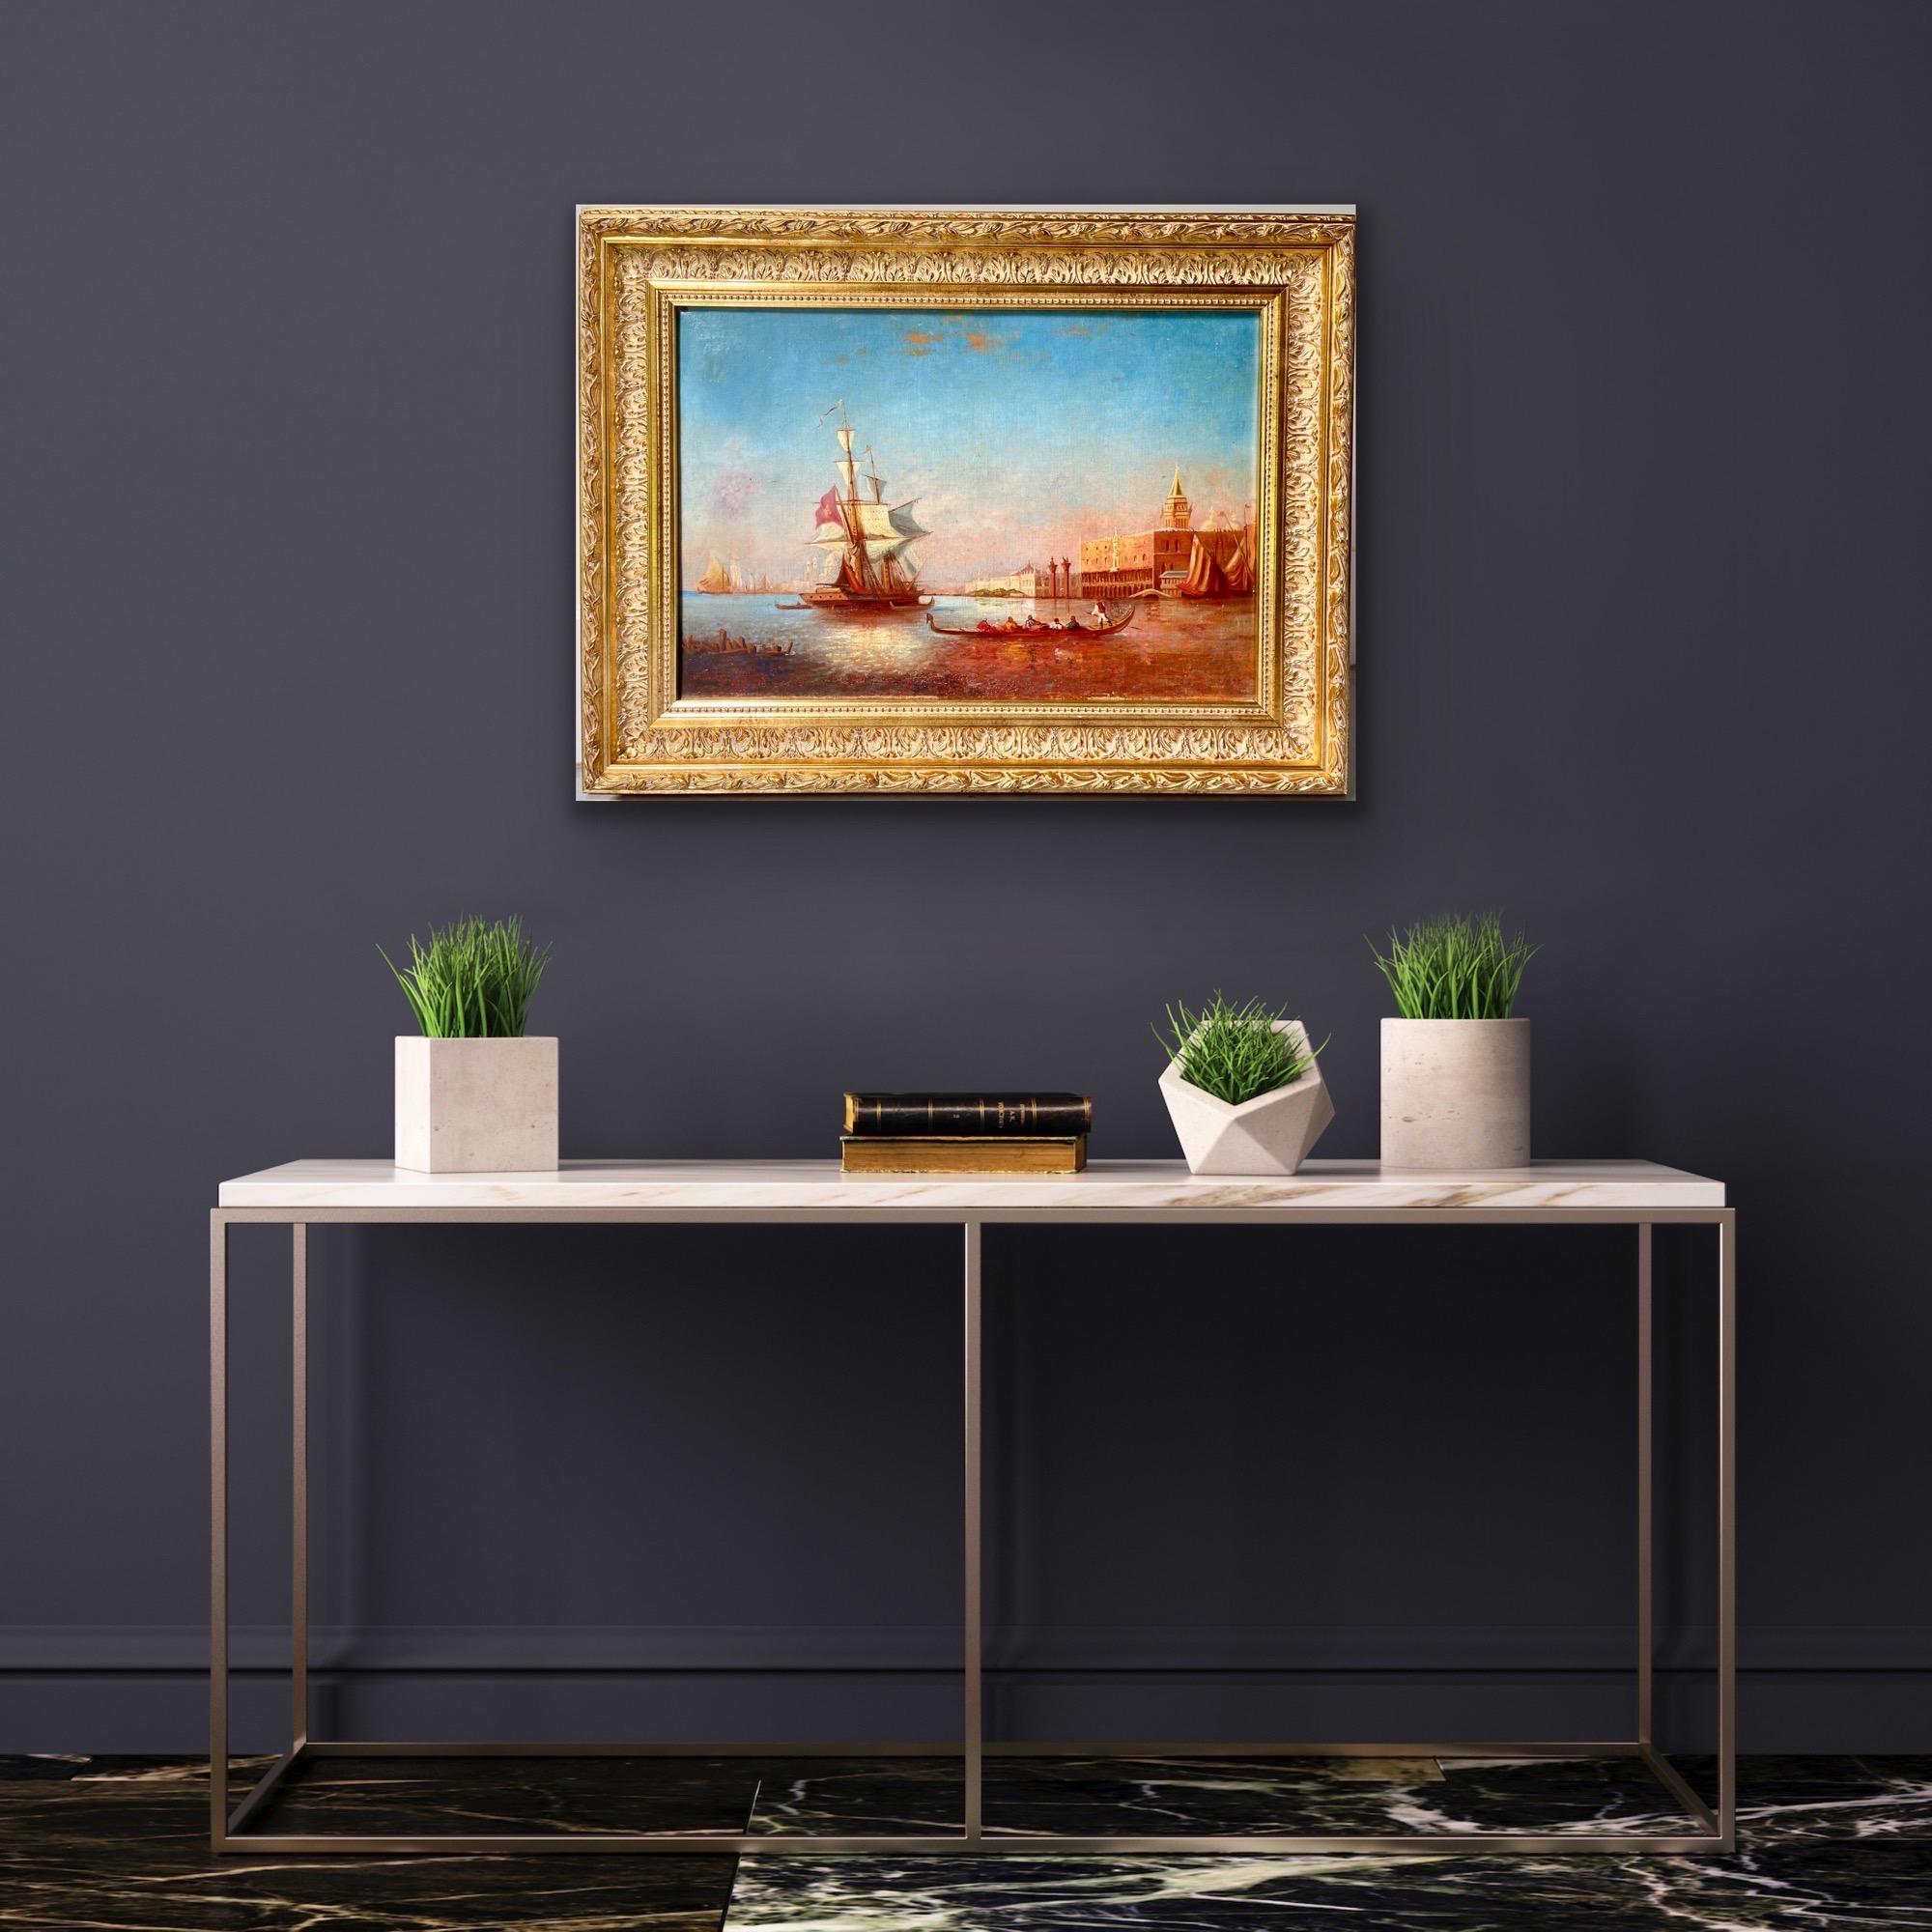 19th century romantic French painting - View of Venice - Ziem San Marco For Sale 1